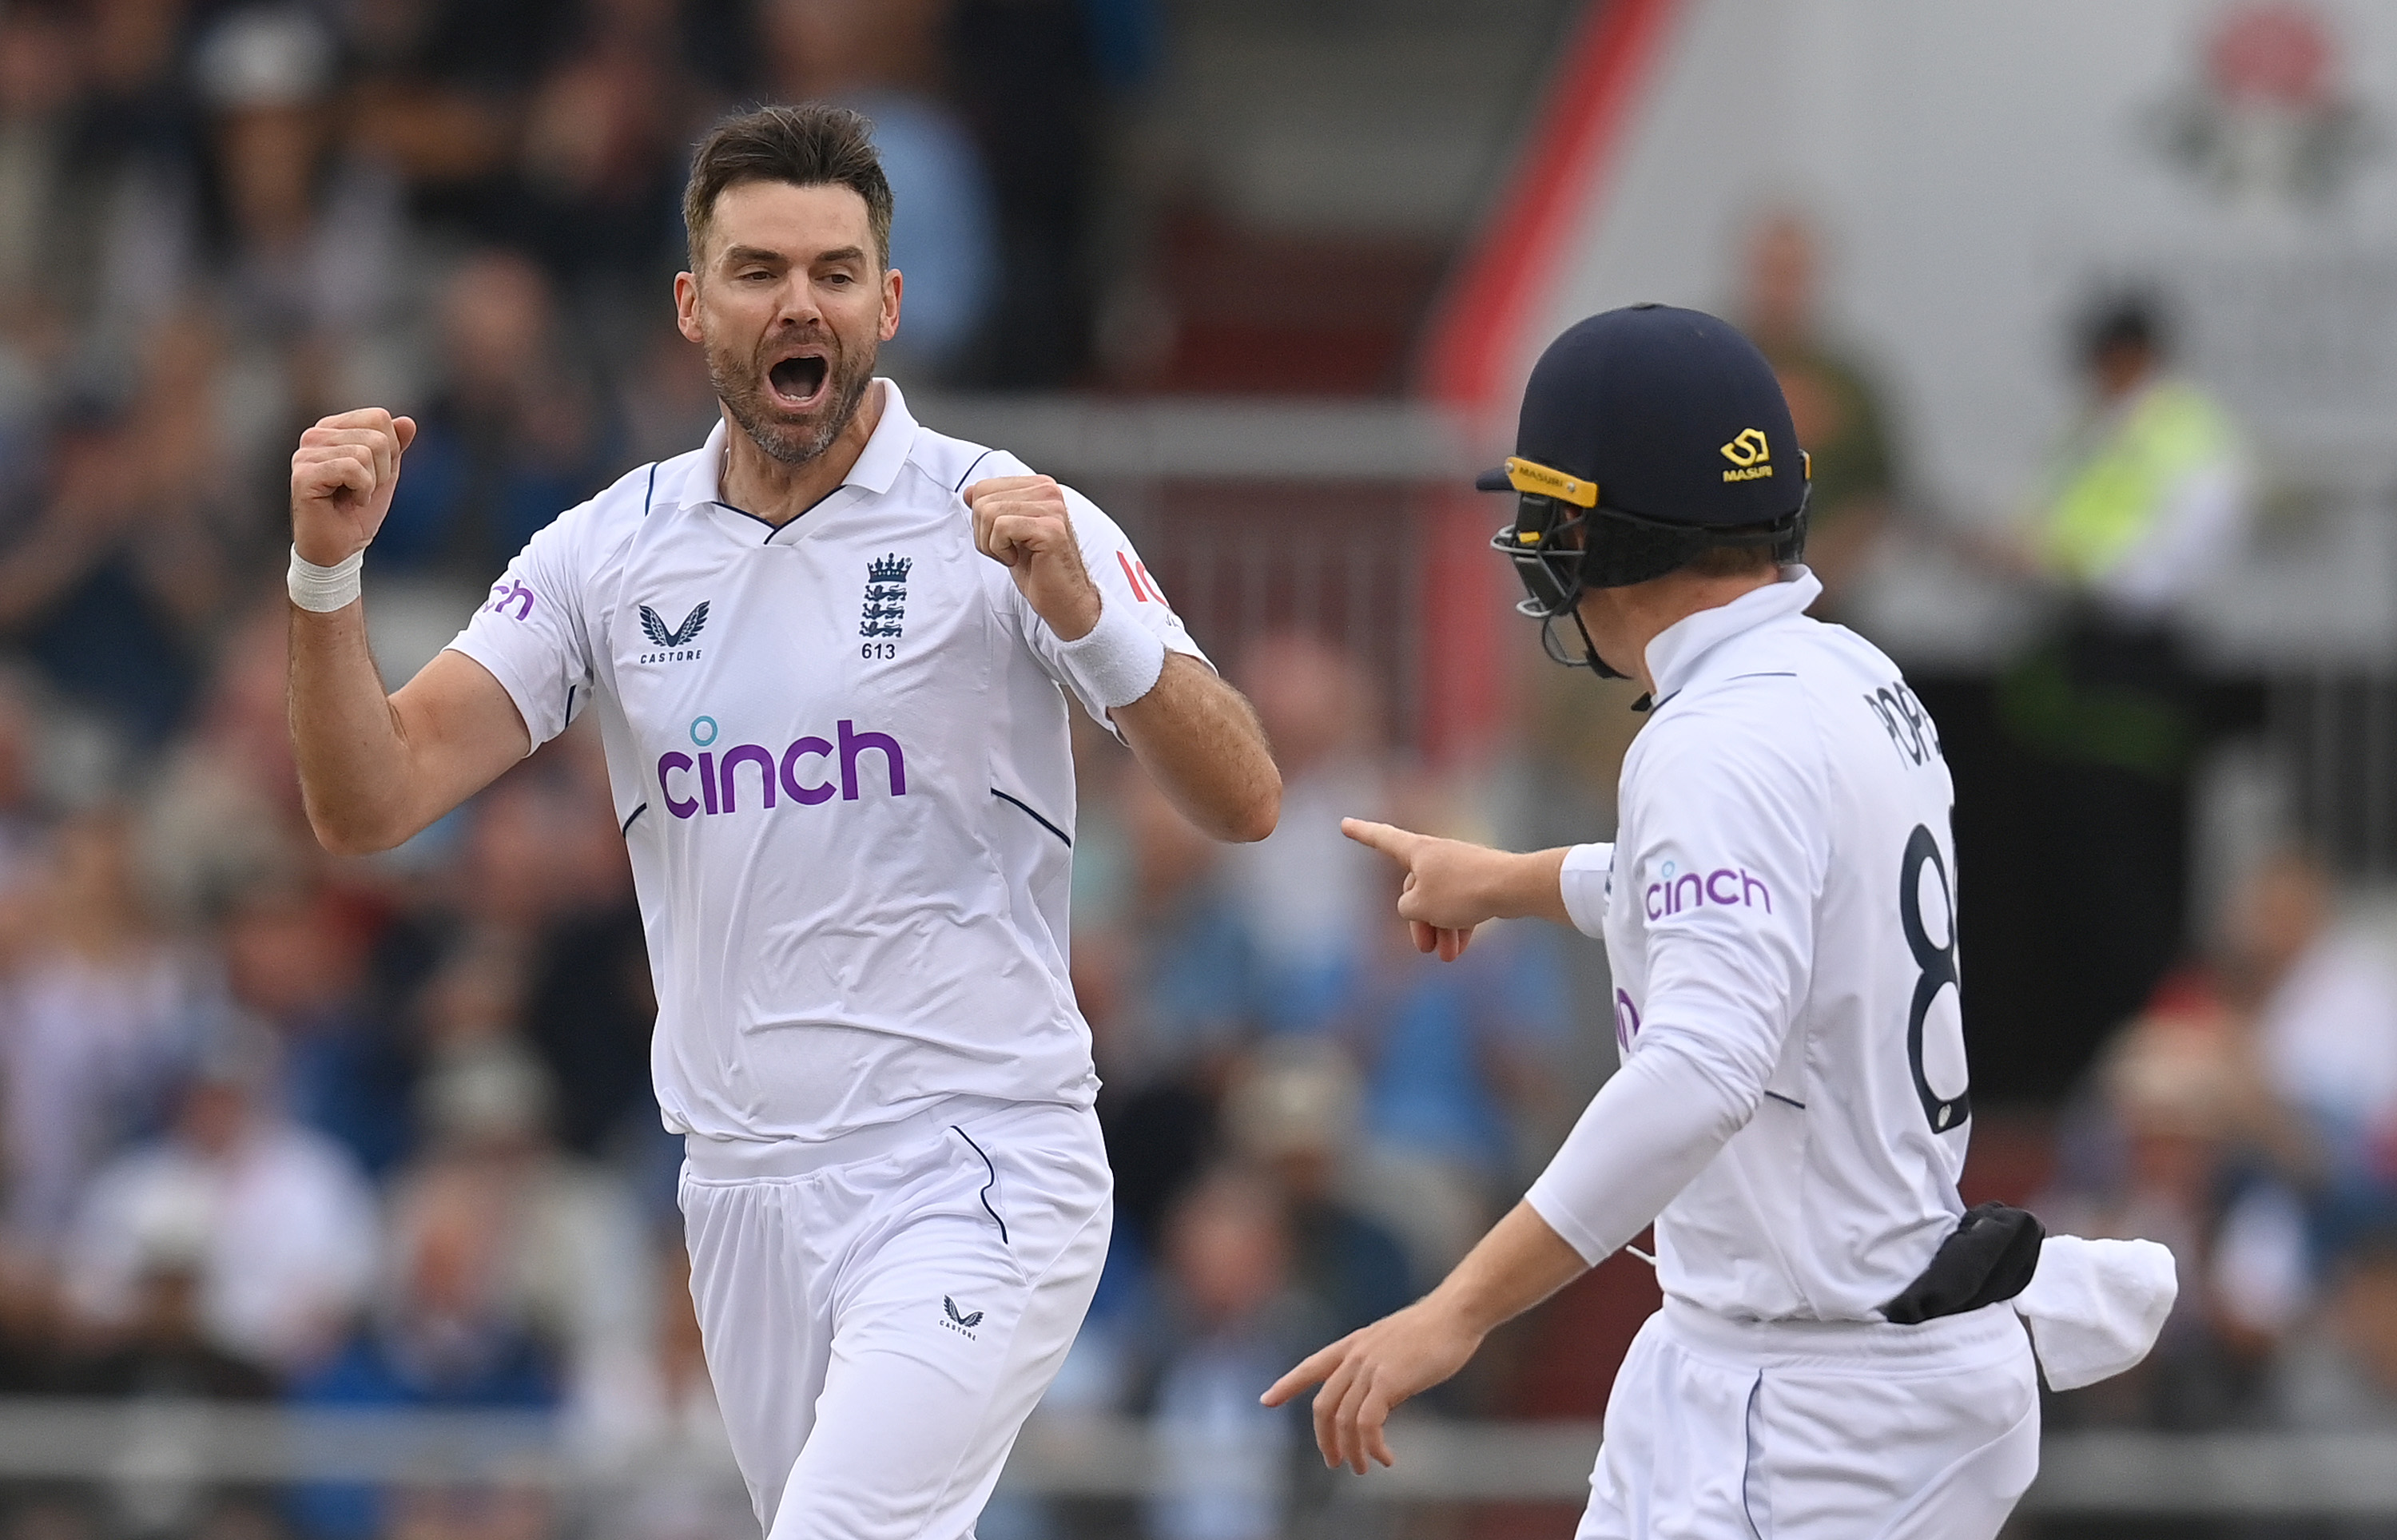 WATCH | ‘Eternal’ James Anderson makes a mockery of Dean Elgar’s defence at Old Trafford